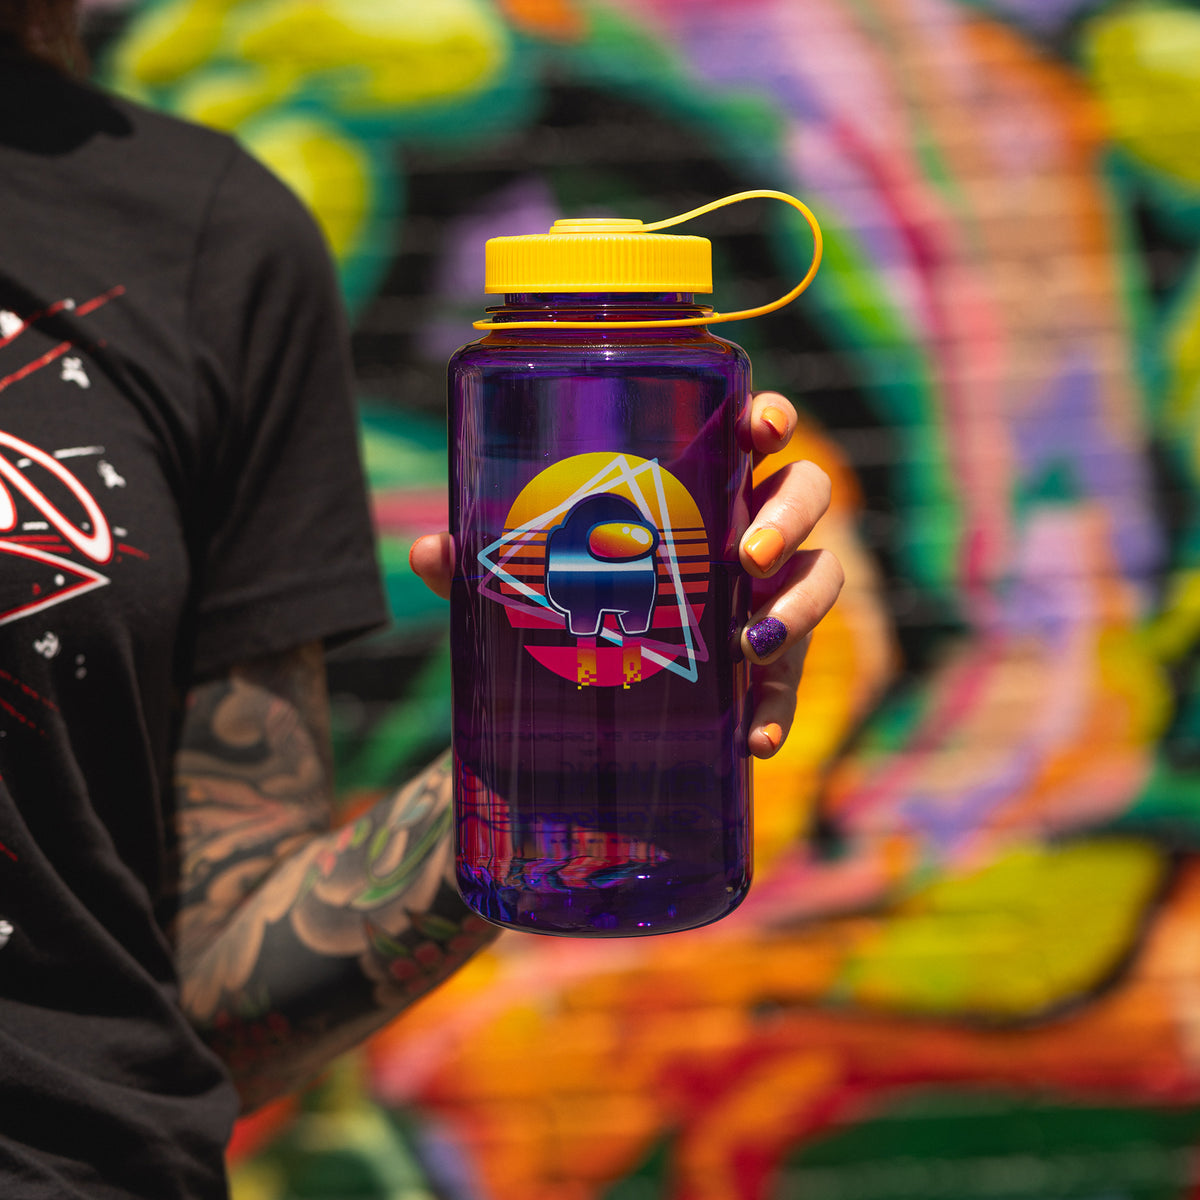 A model holding the Crewmate water bottle in front of a graffiti wall.